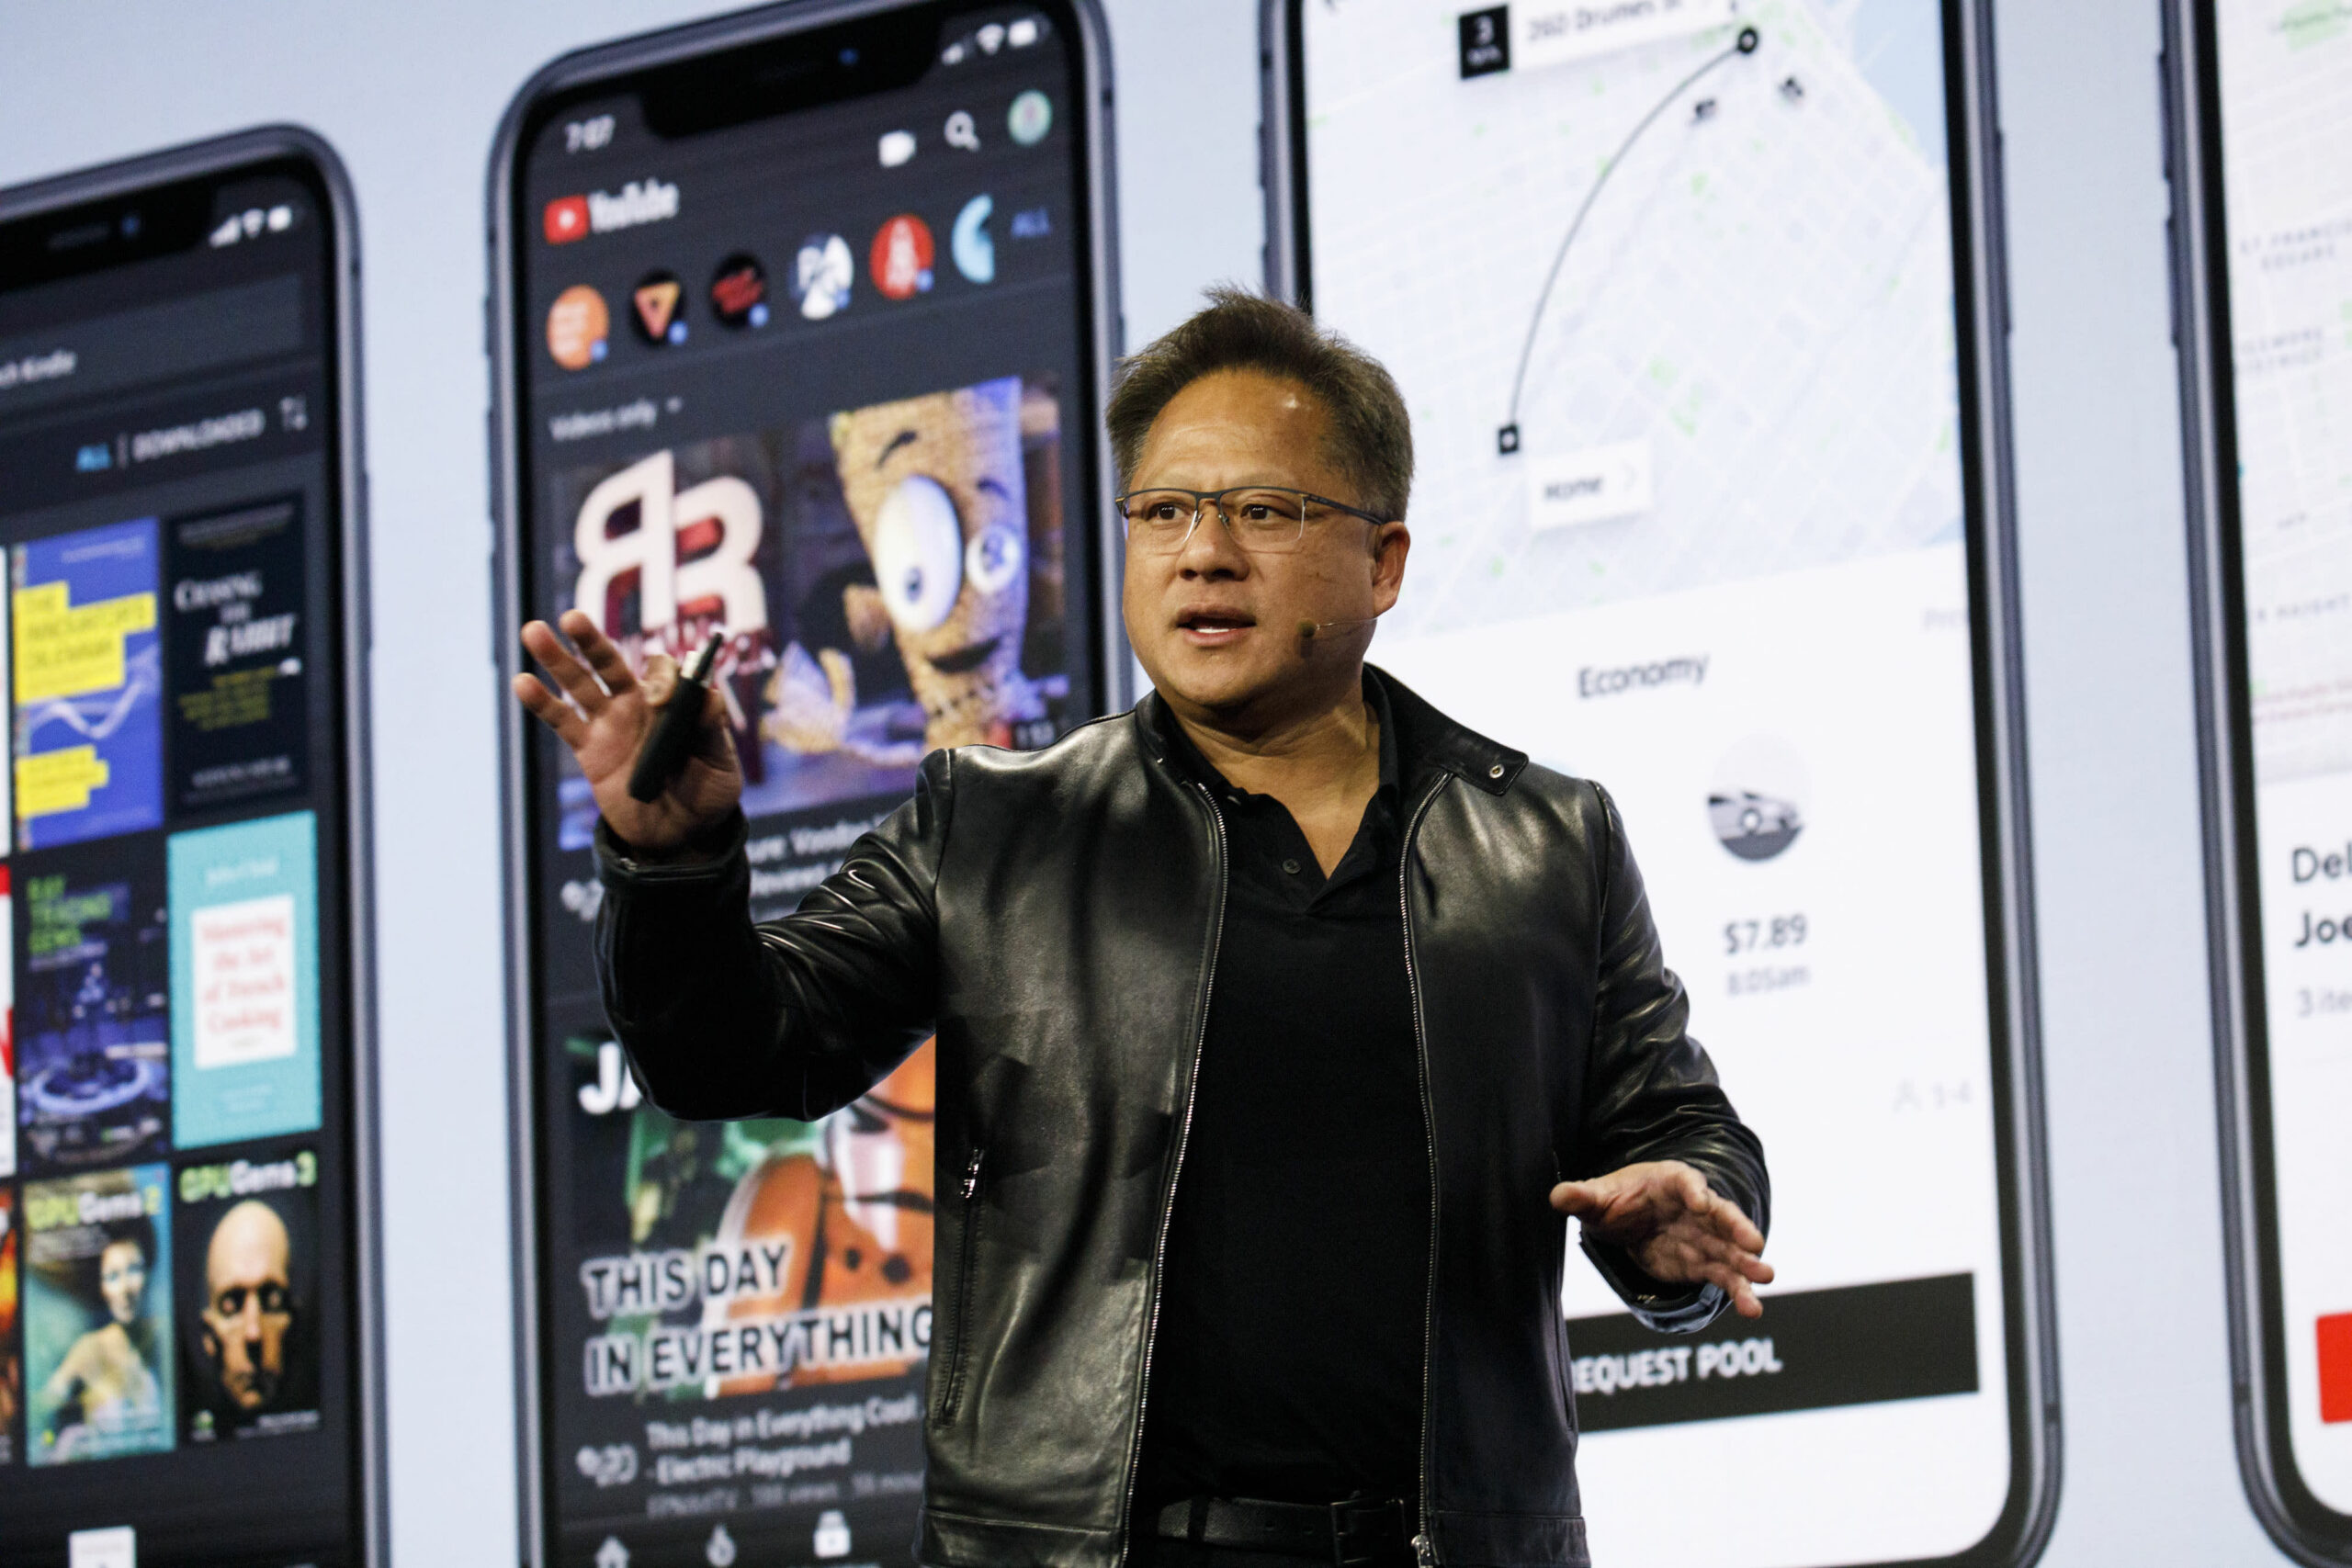 Nvidia CEO says the metaverse could save companies billions